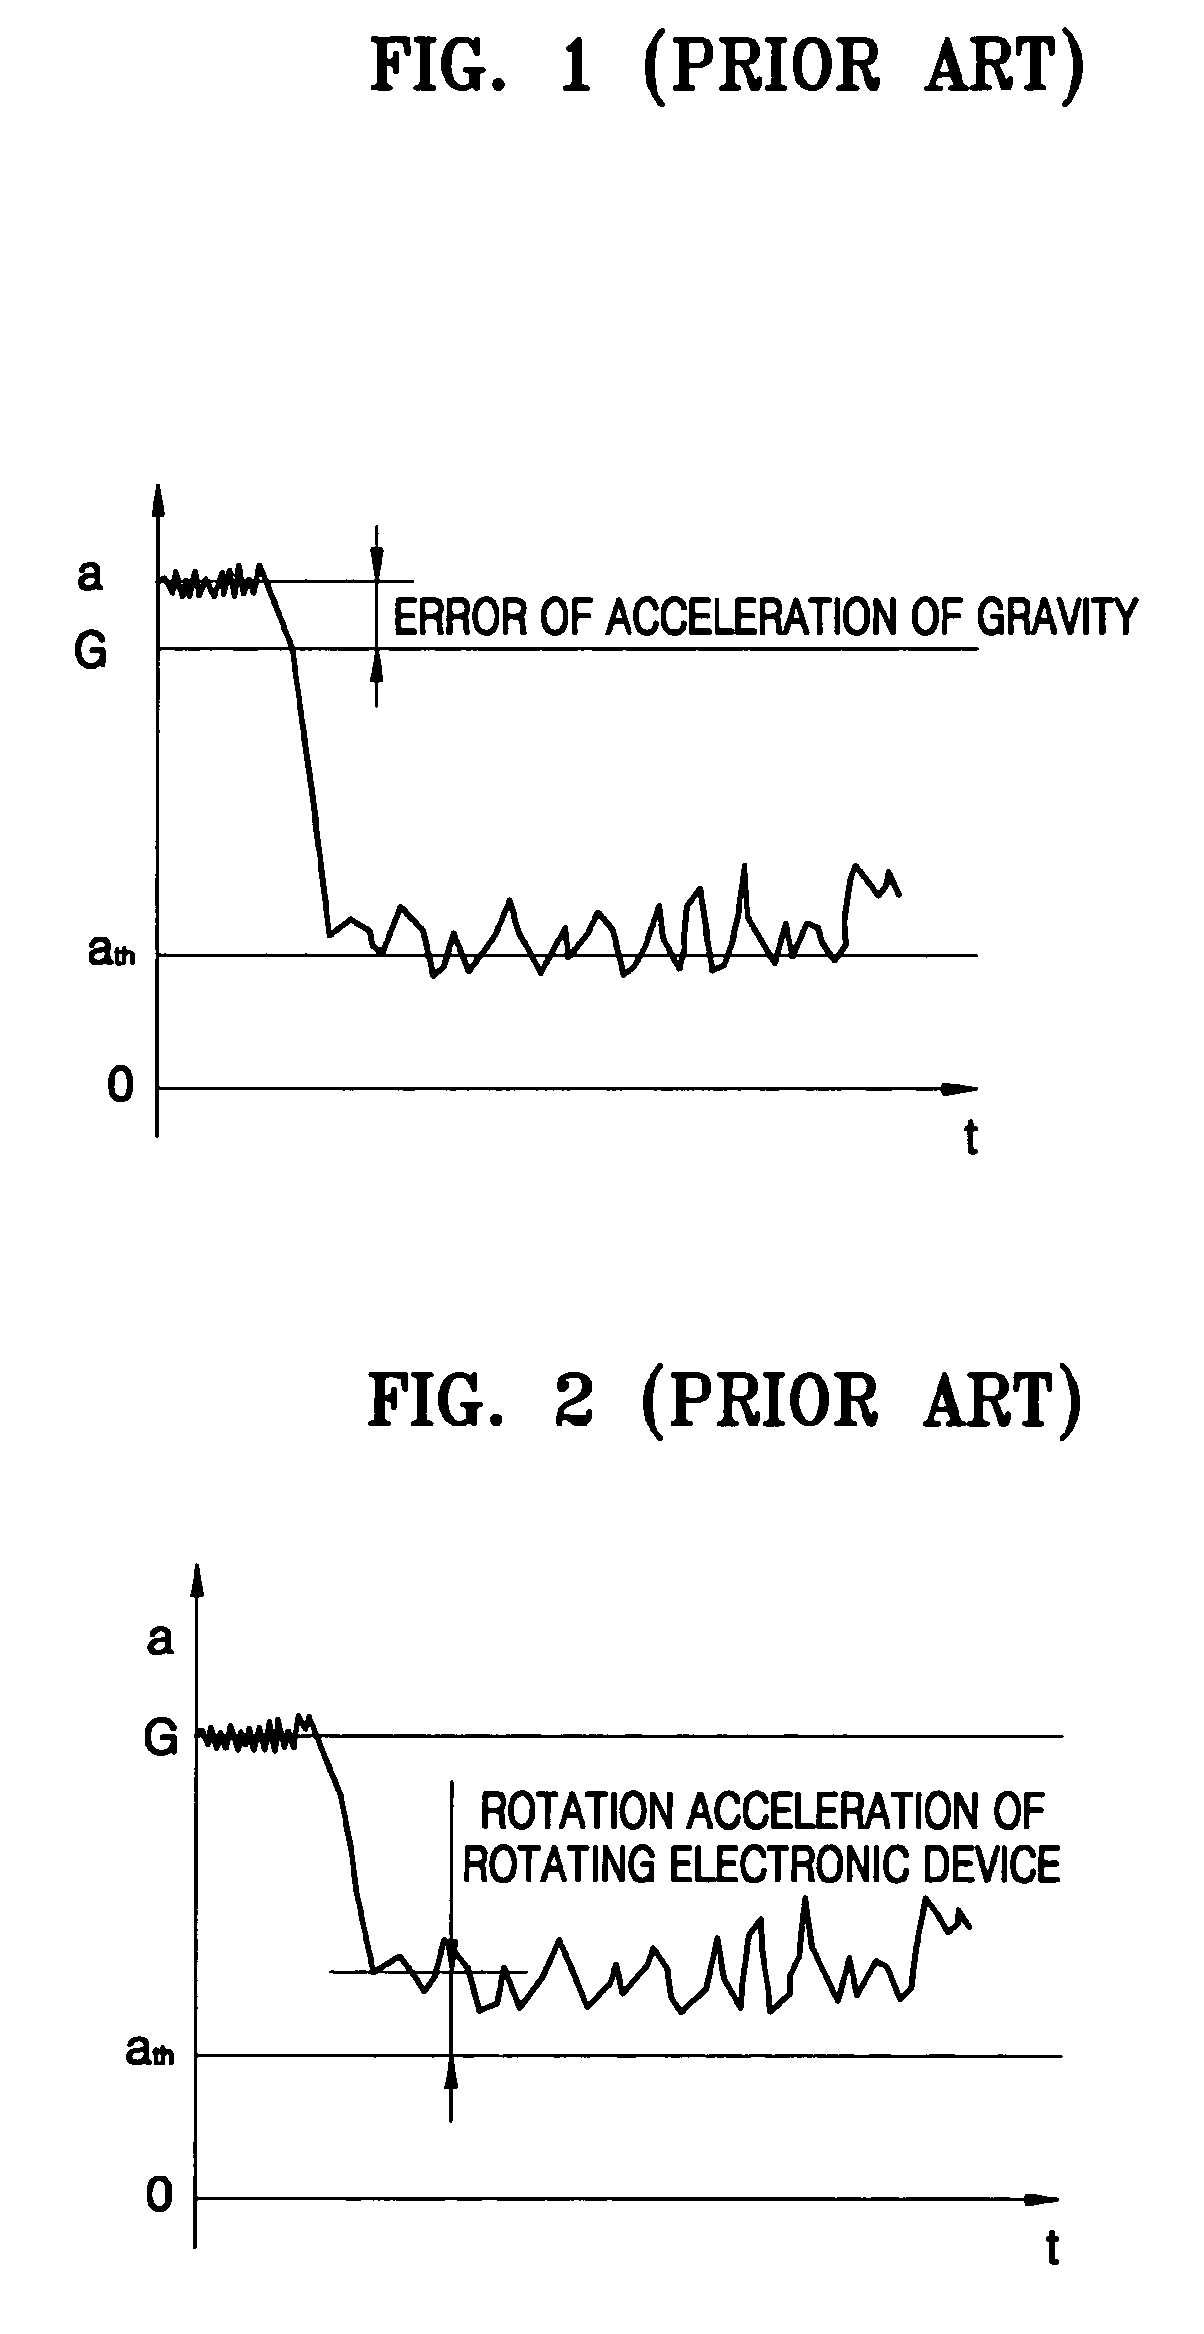 Method and apparatus for detecting free fall of electronic device